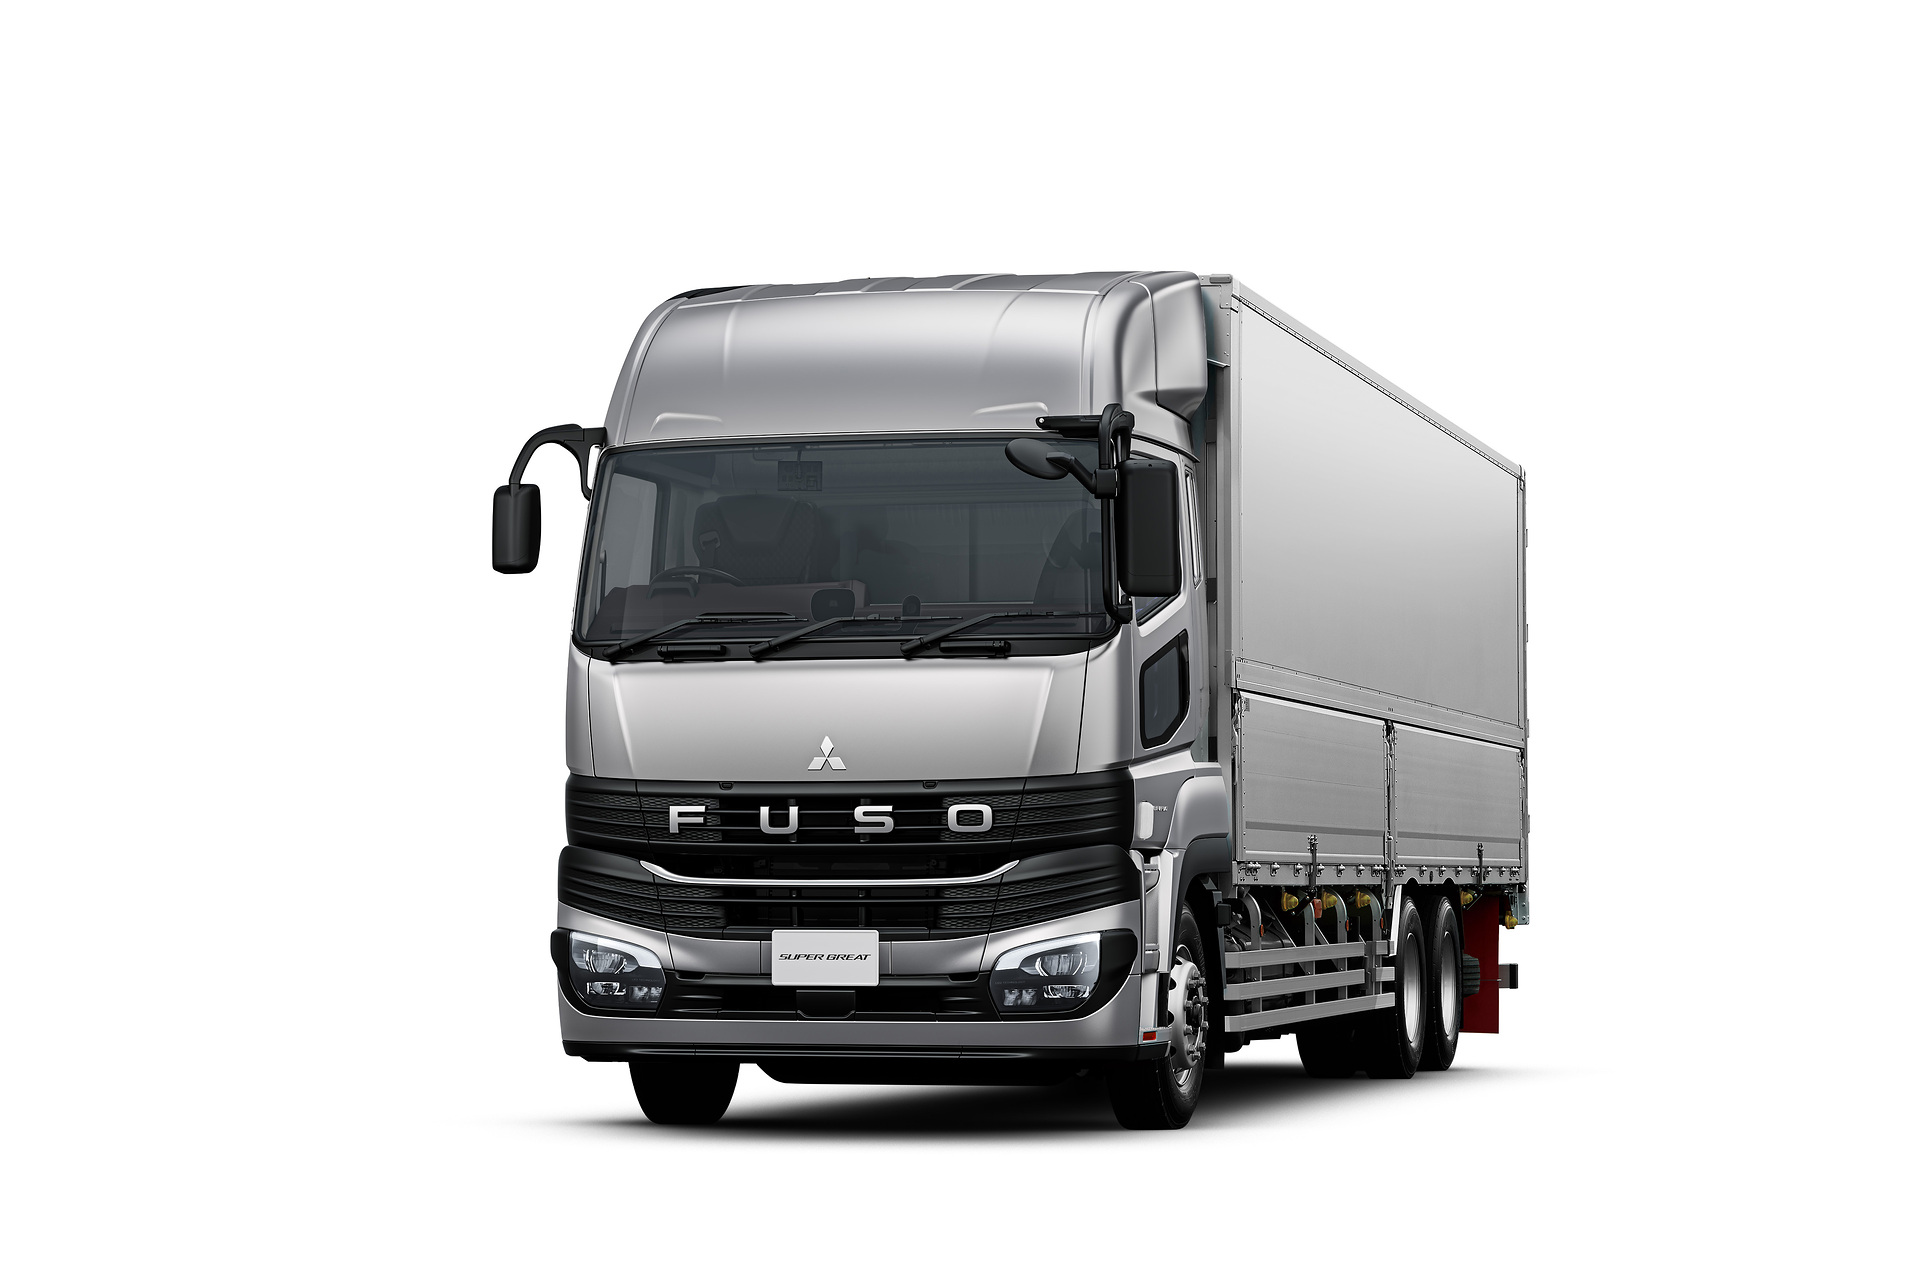 JAPAN MOBILITY SHOW 2023: Daimler Truck subsidiary FUSO presents fully remodelled heavy-duty truck Super Great